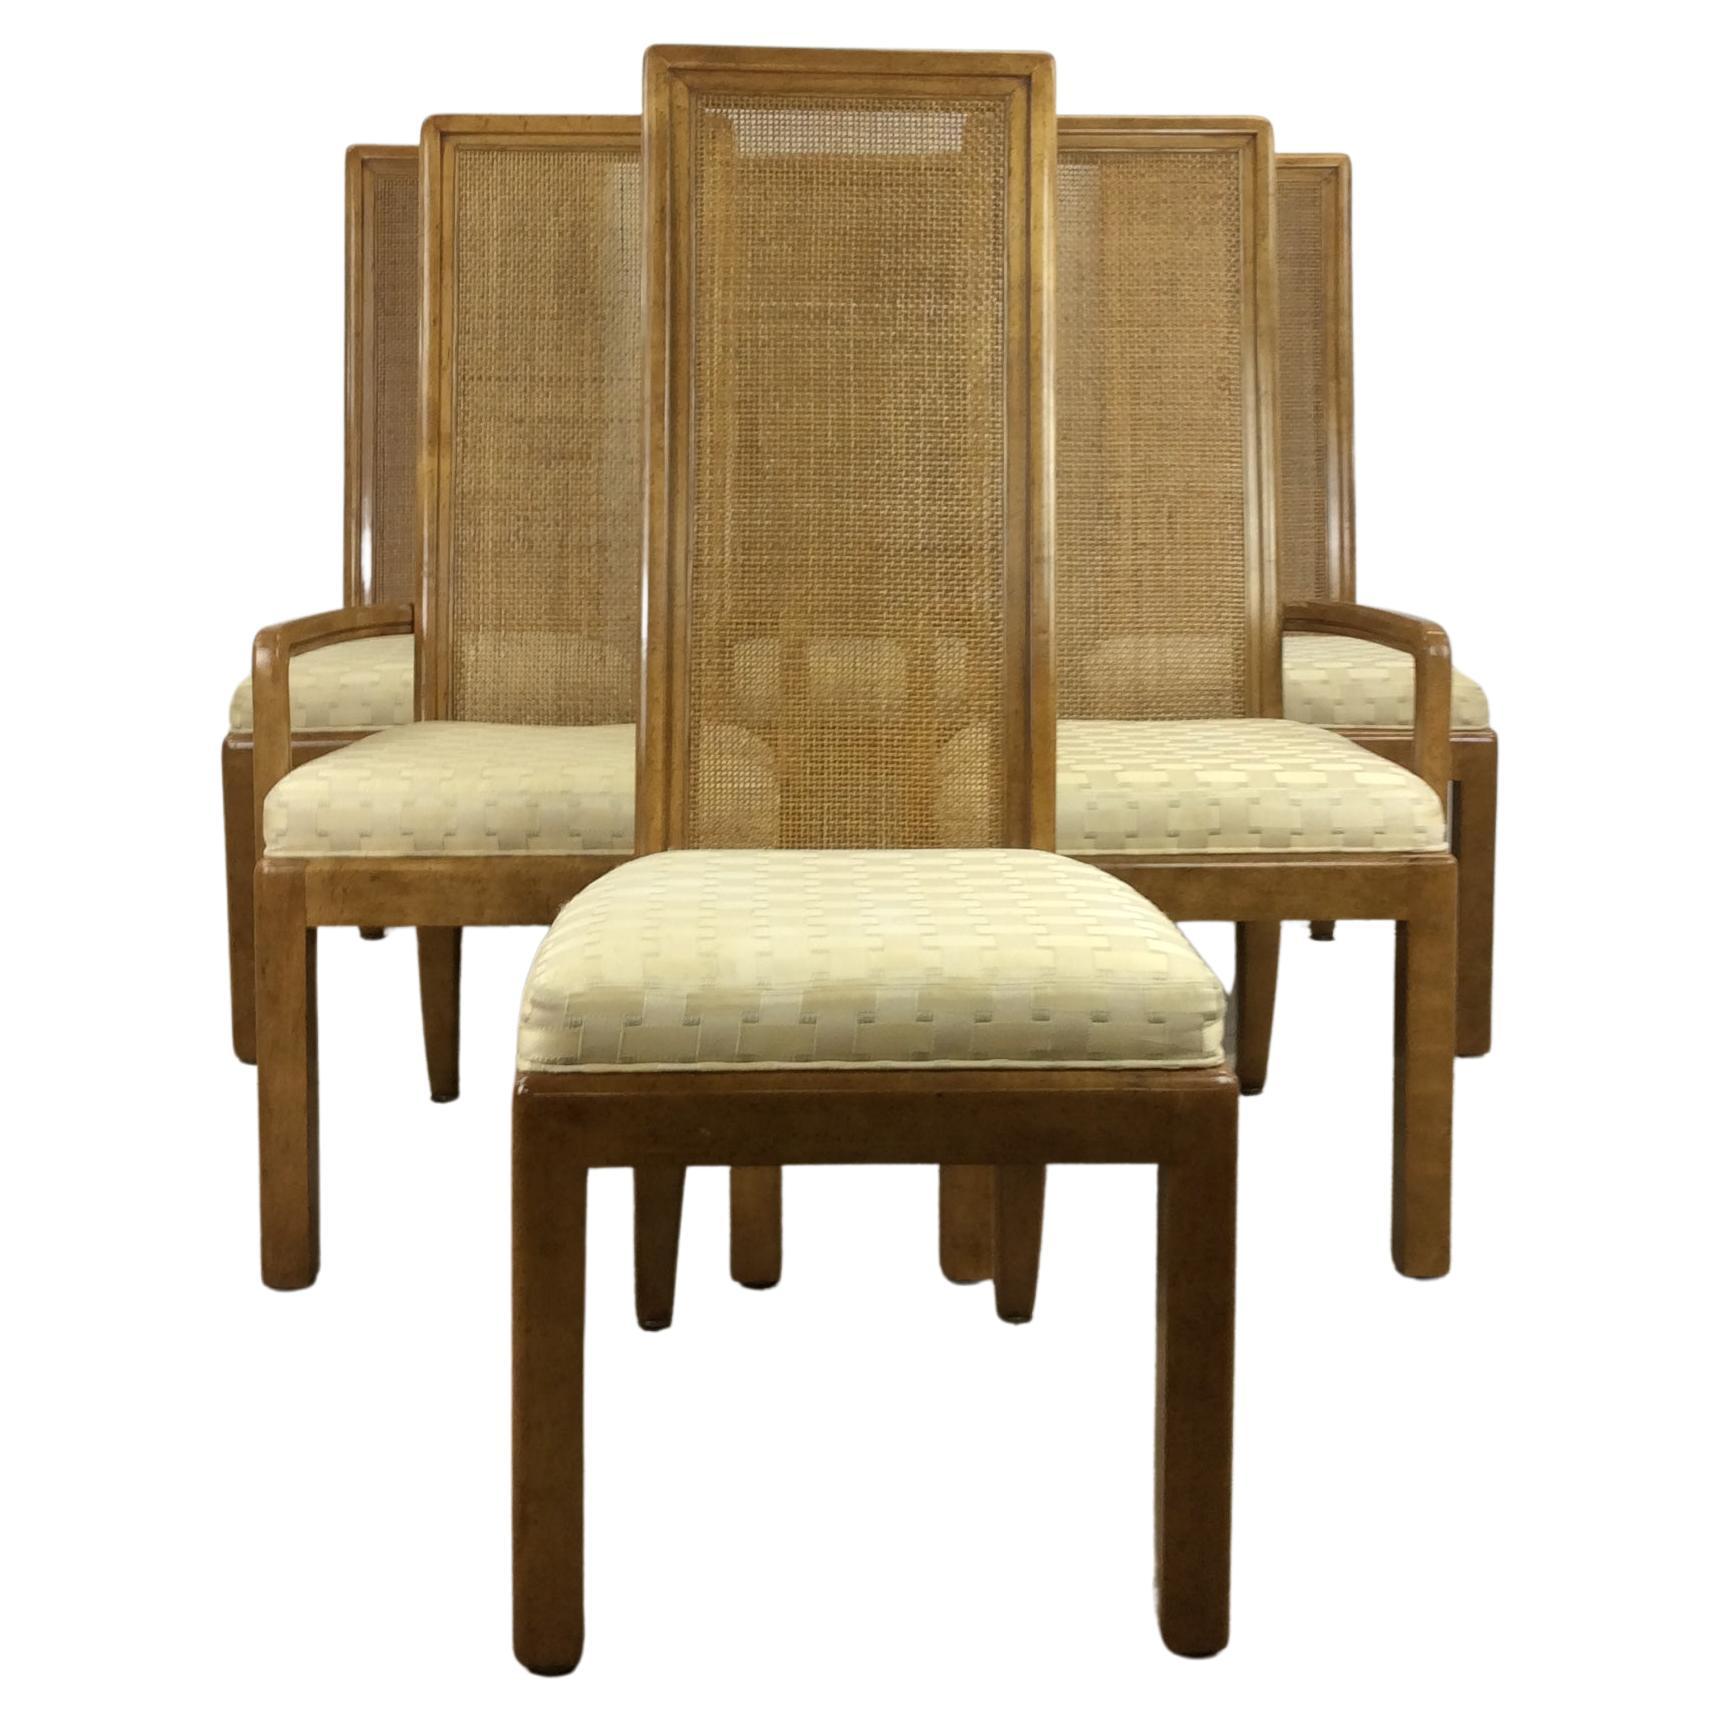 Set of 6 Postmodern Cane Back Dining Chairs by American of Martinsville